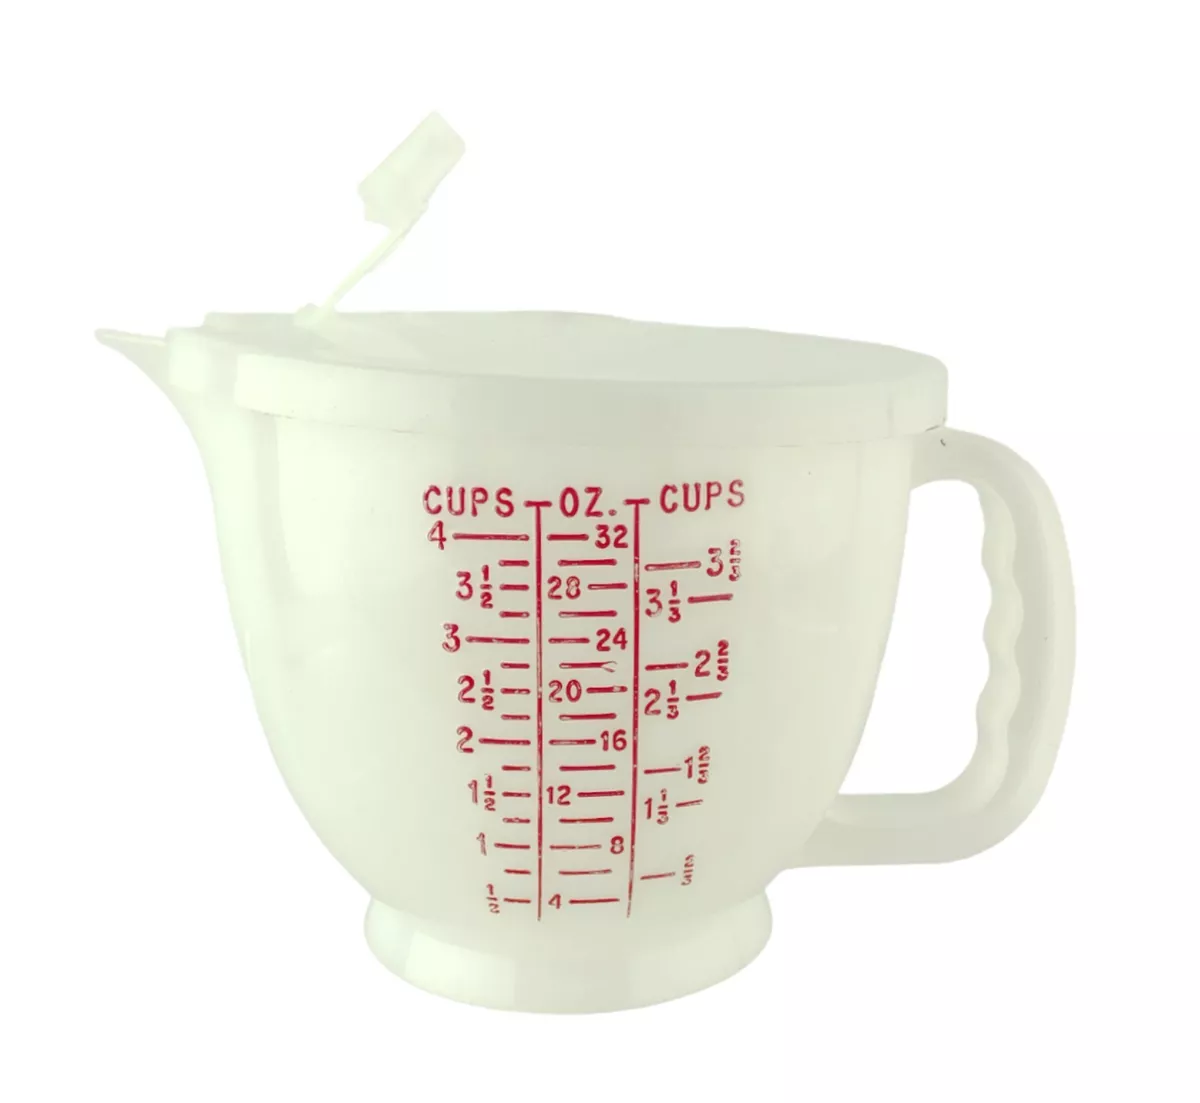 Sold at Auction: Large Tupperware Measuring cup, with lid